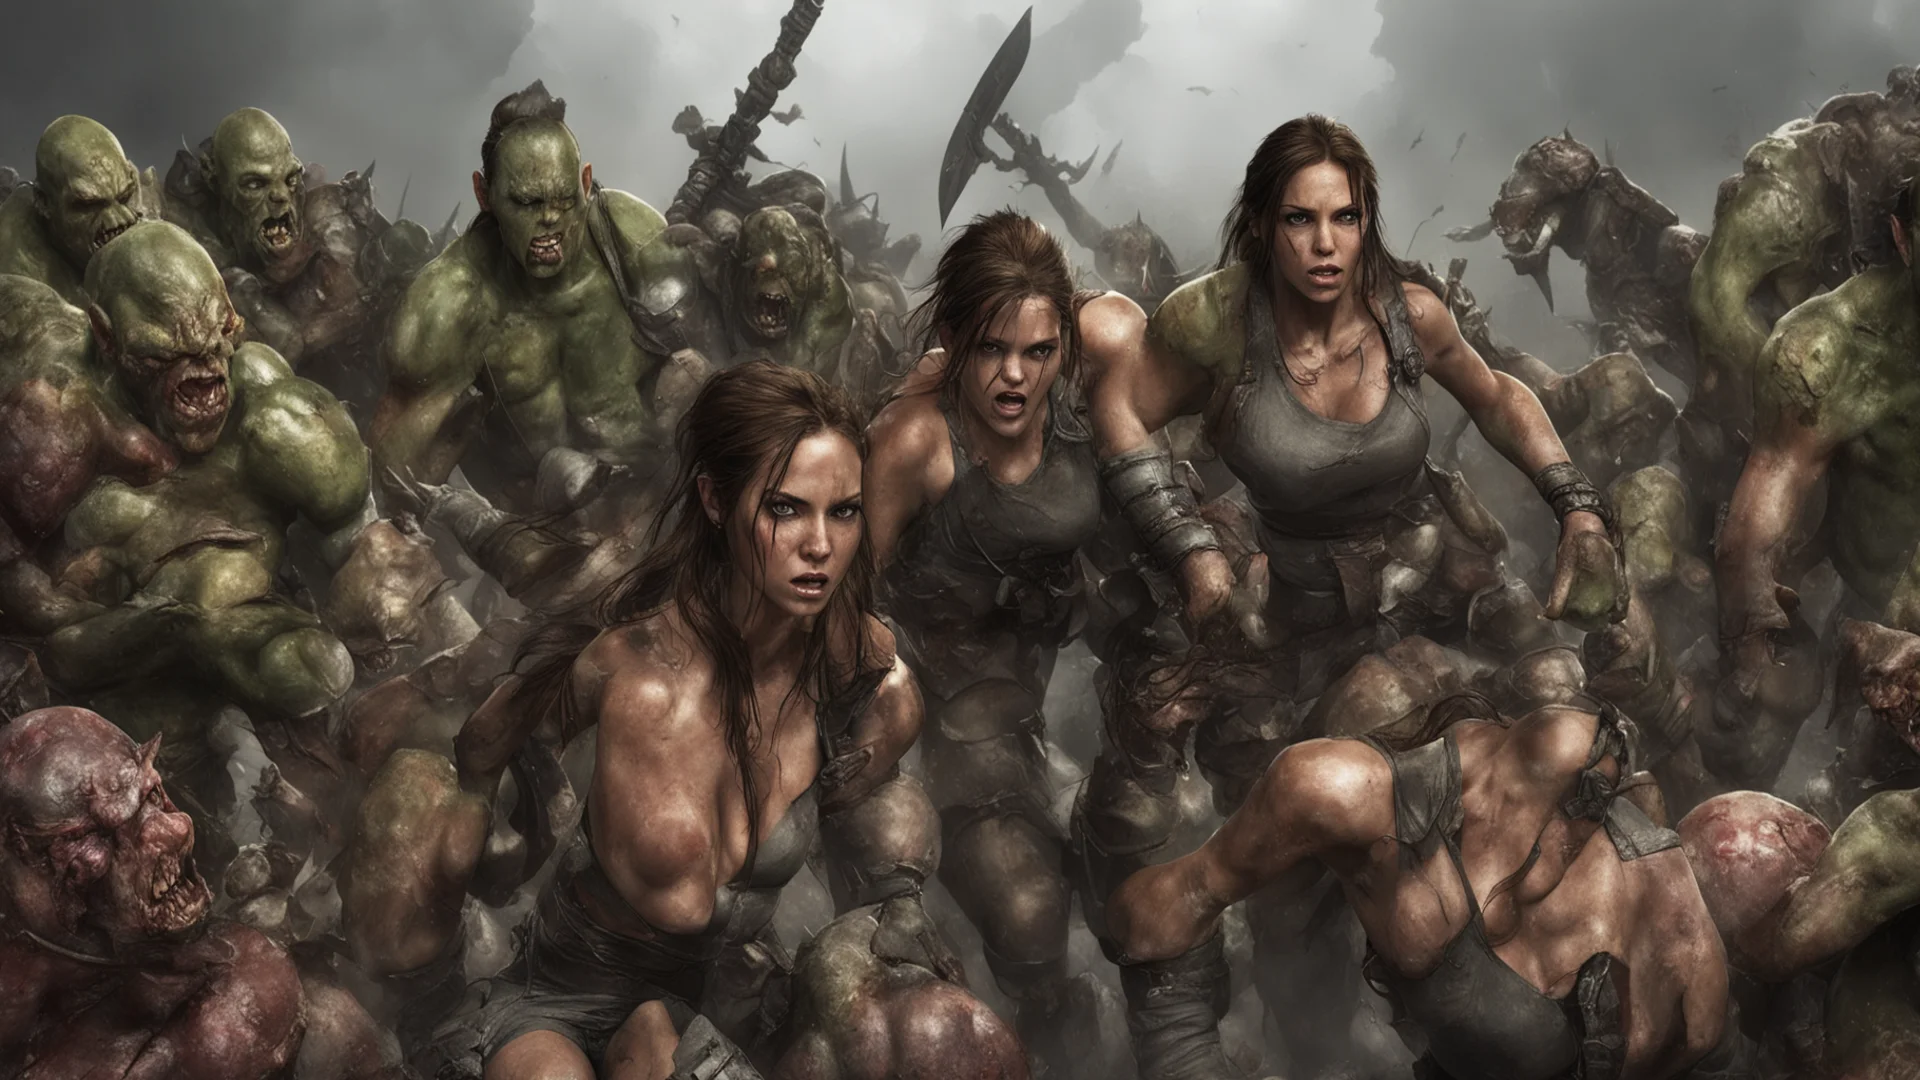 aiartstation art fallen lara croft surrounded by angry orcs confident engaging wow 3 wide